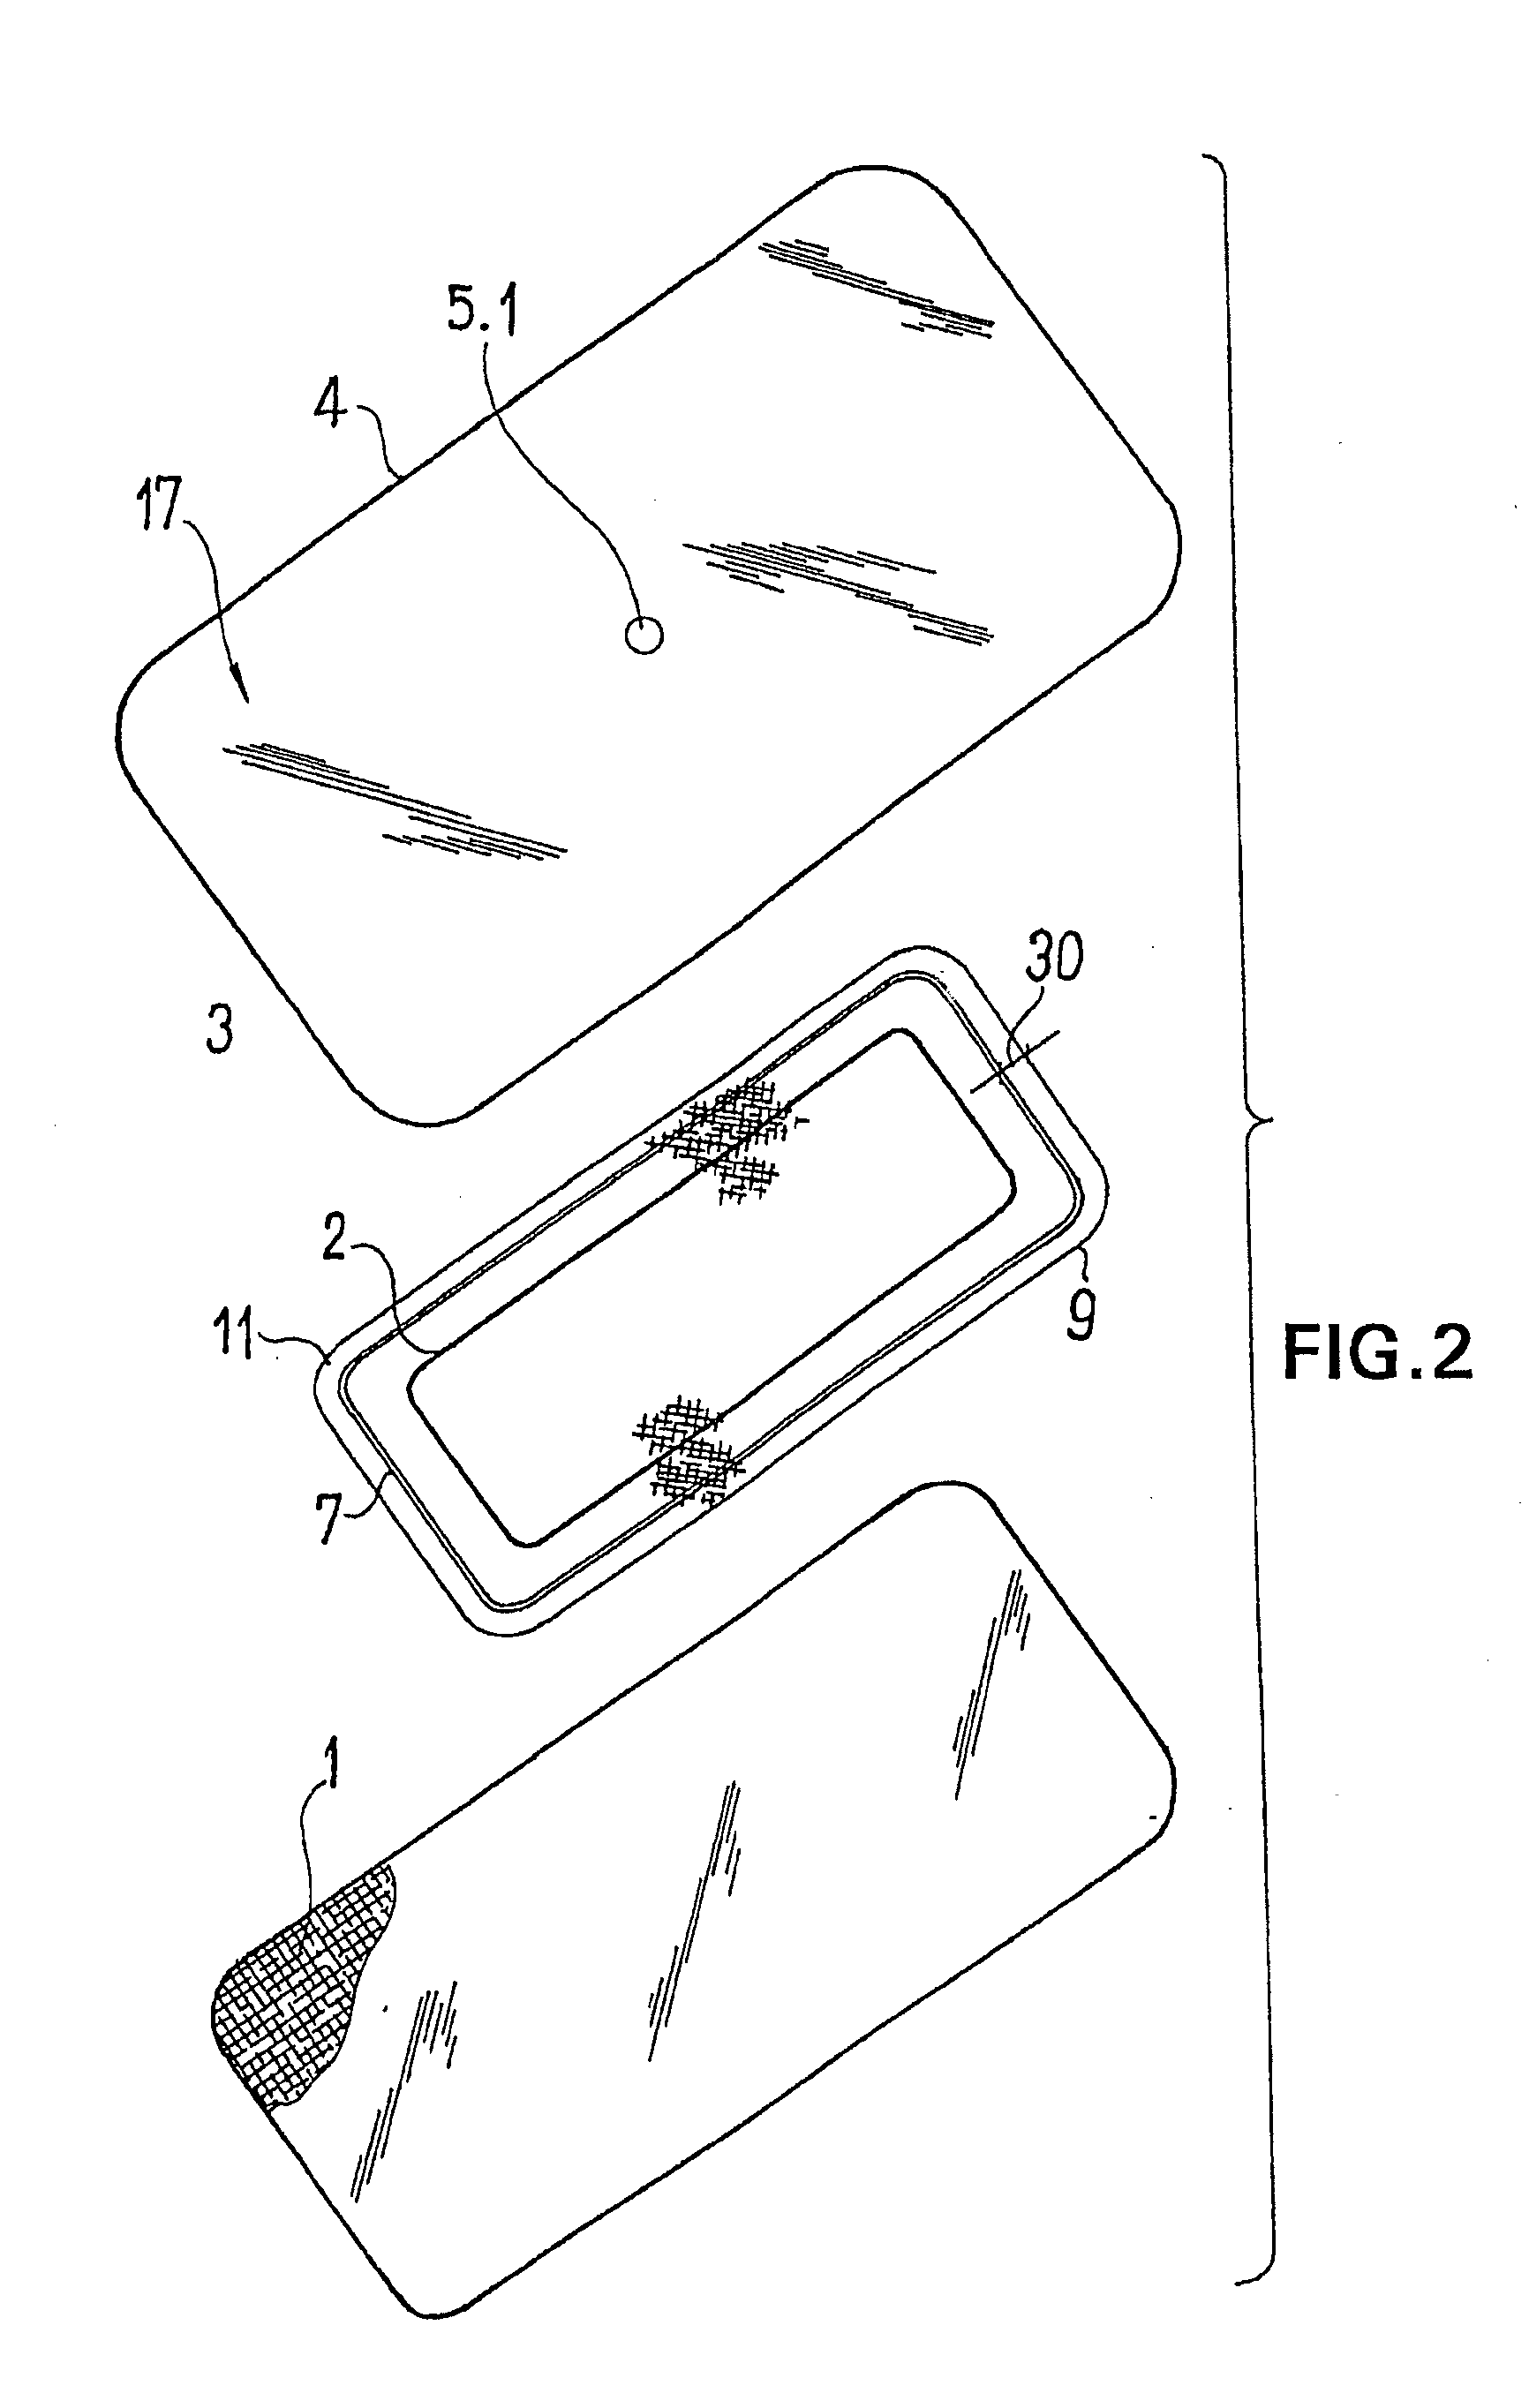 Device for the treatment of wounds using a vacuum